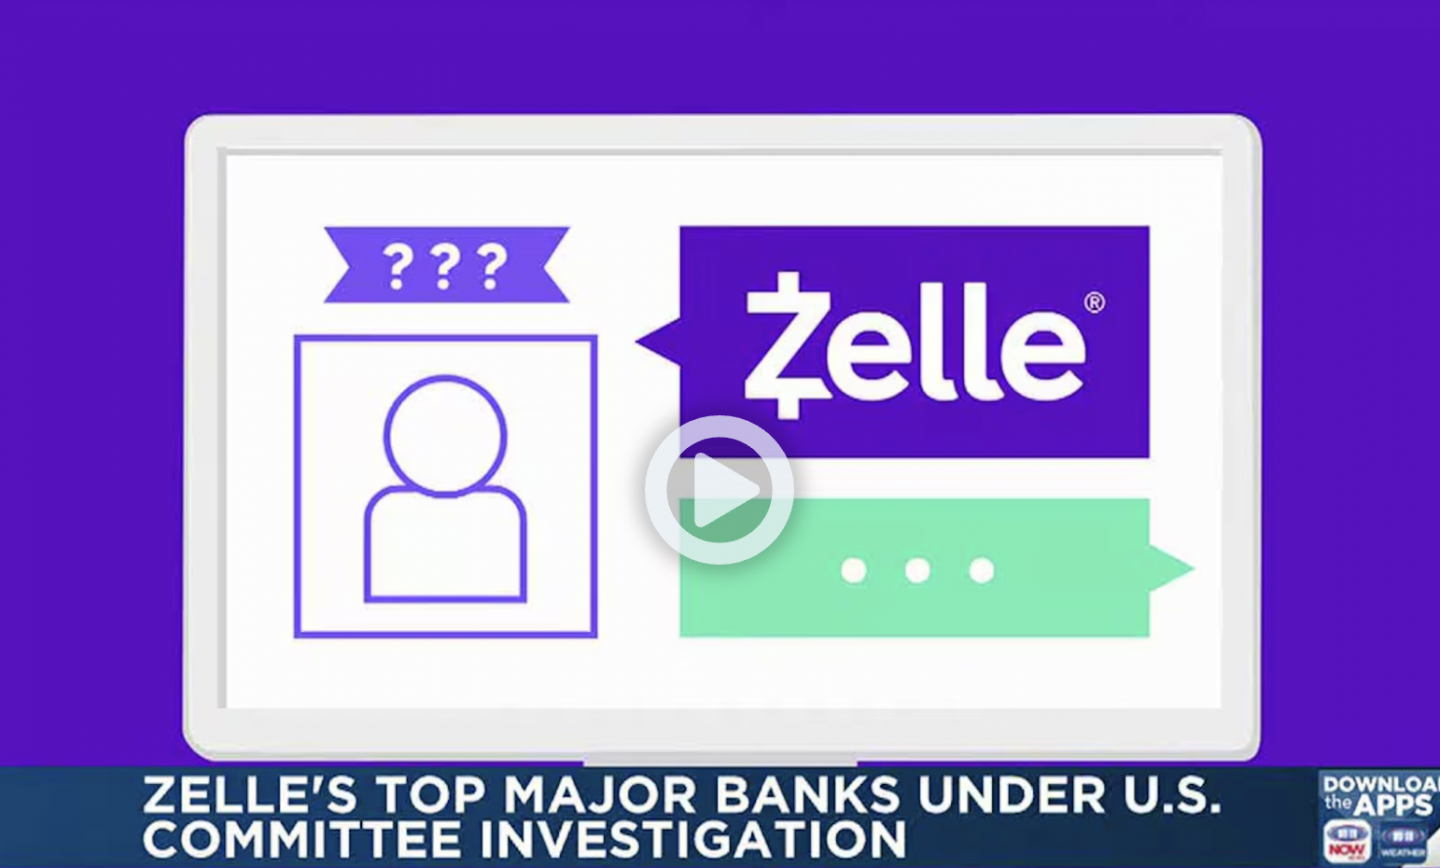 Federal investigation discovers top banks rarely refund Zelle users in scam disputes